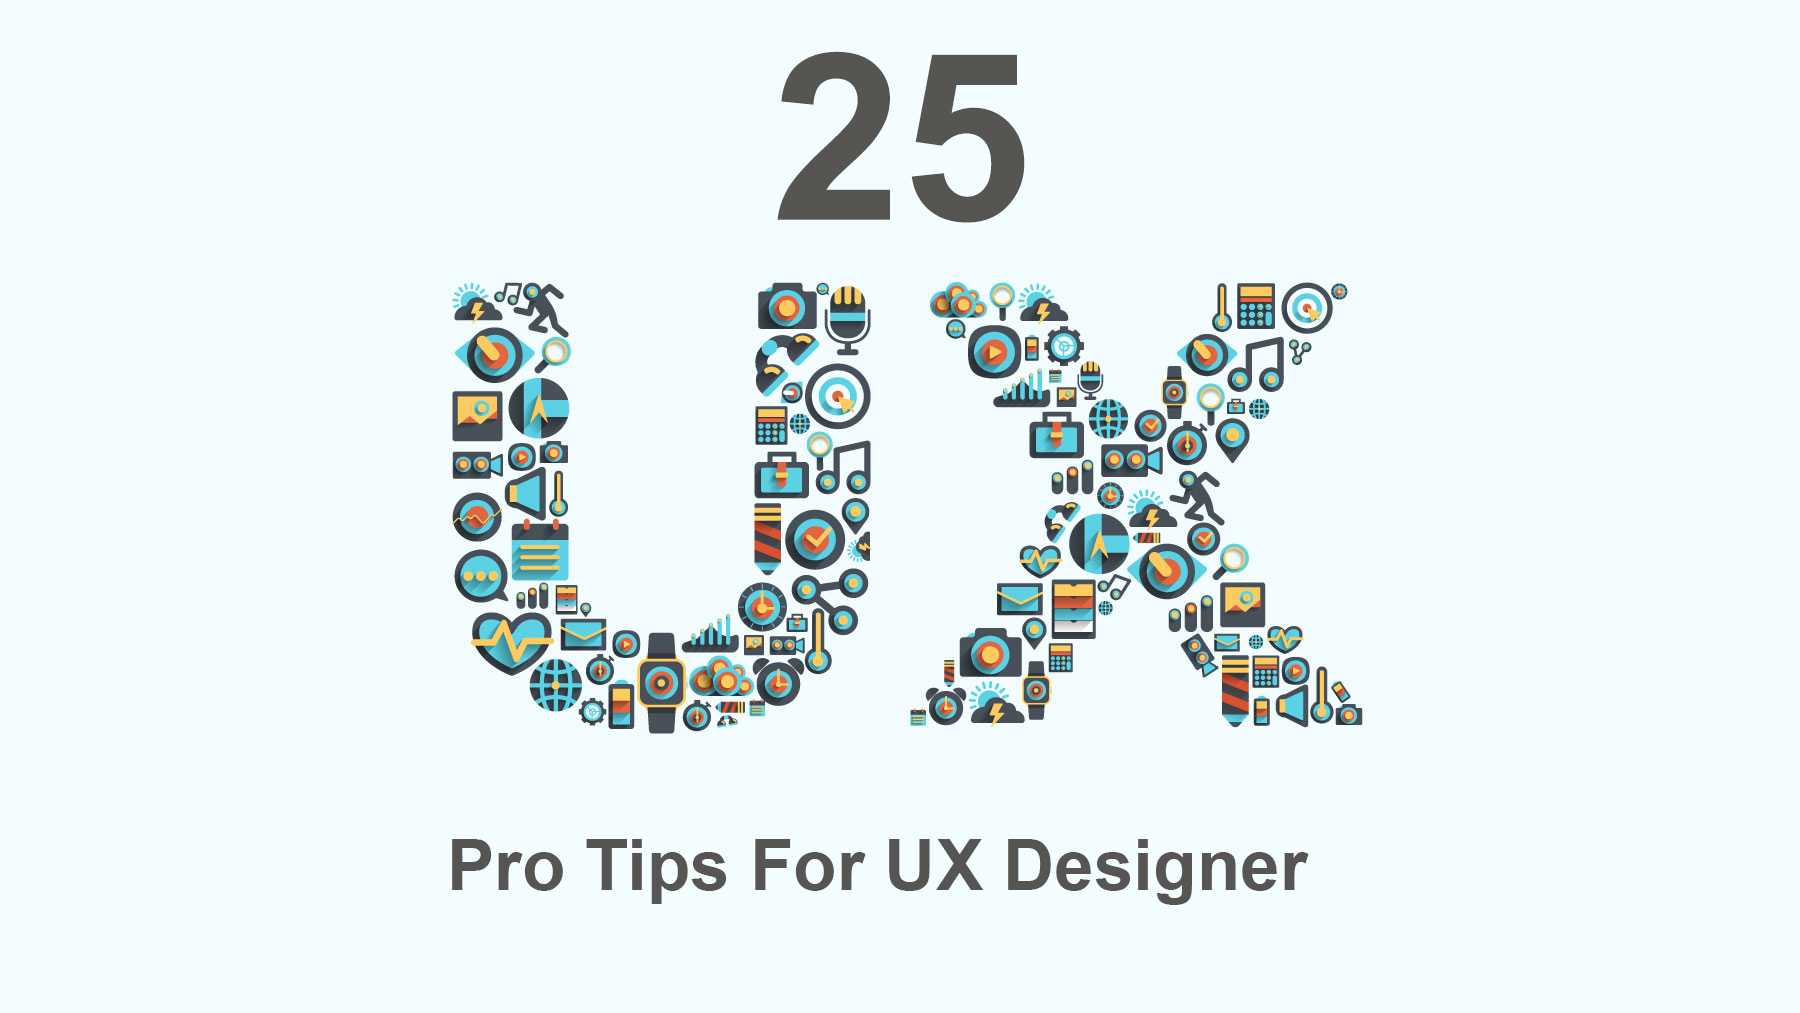 Mastering the Craft: 25 Essential UX Pro Tips for Designers